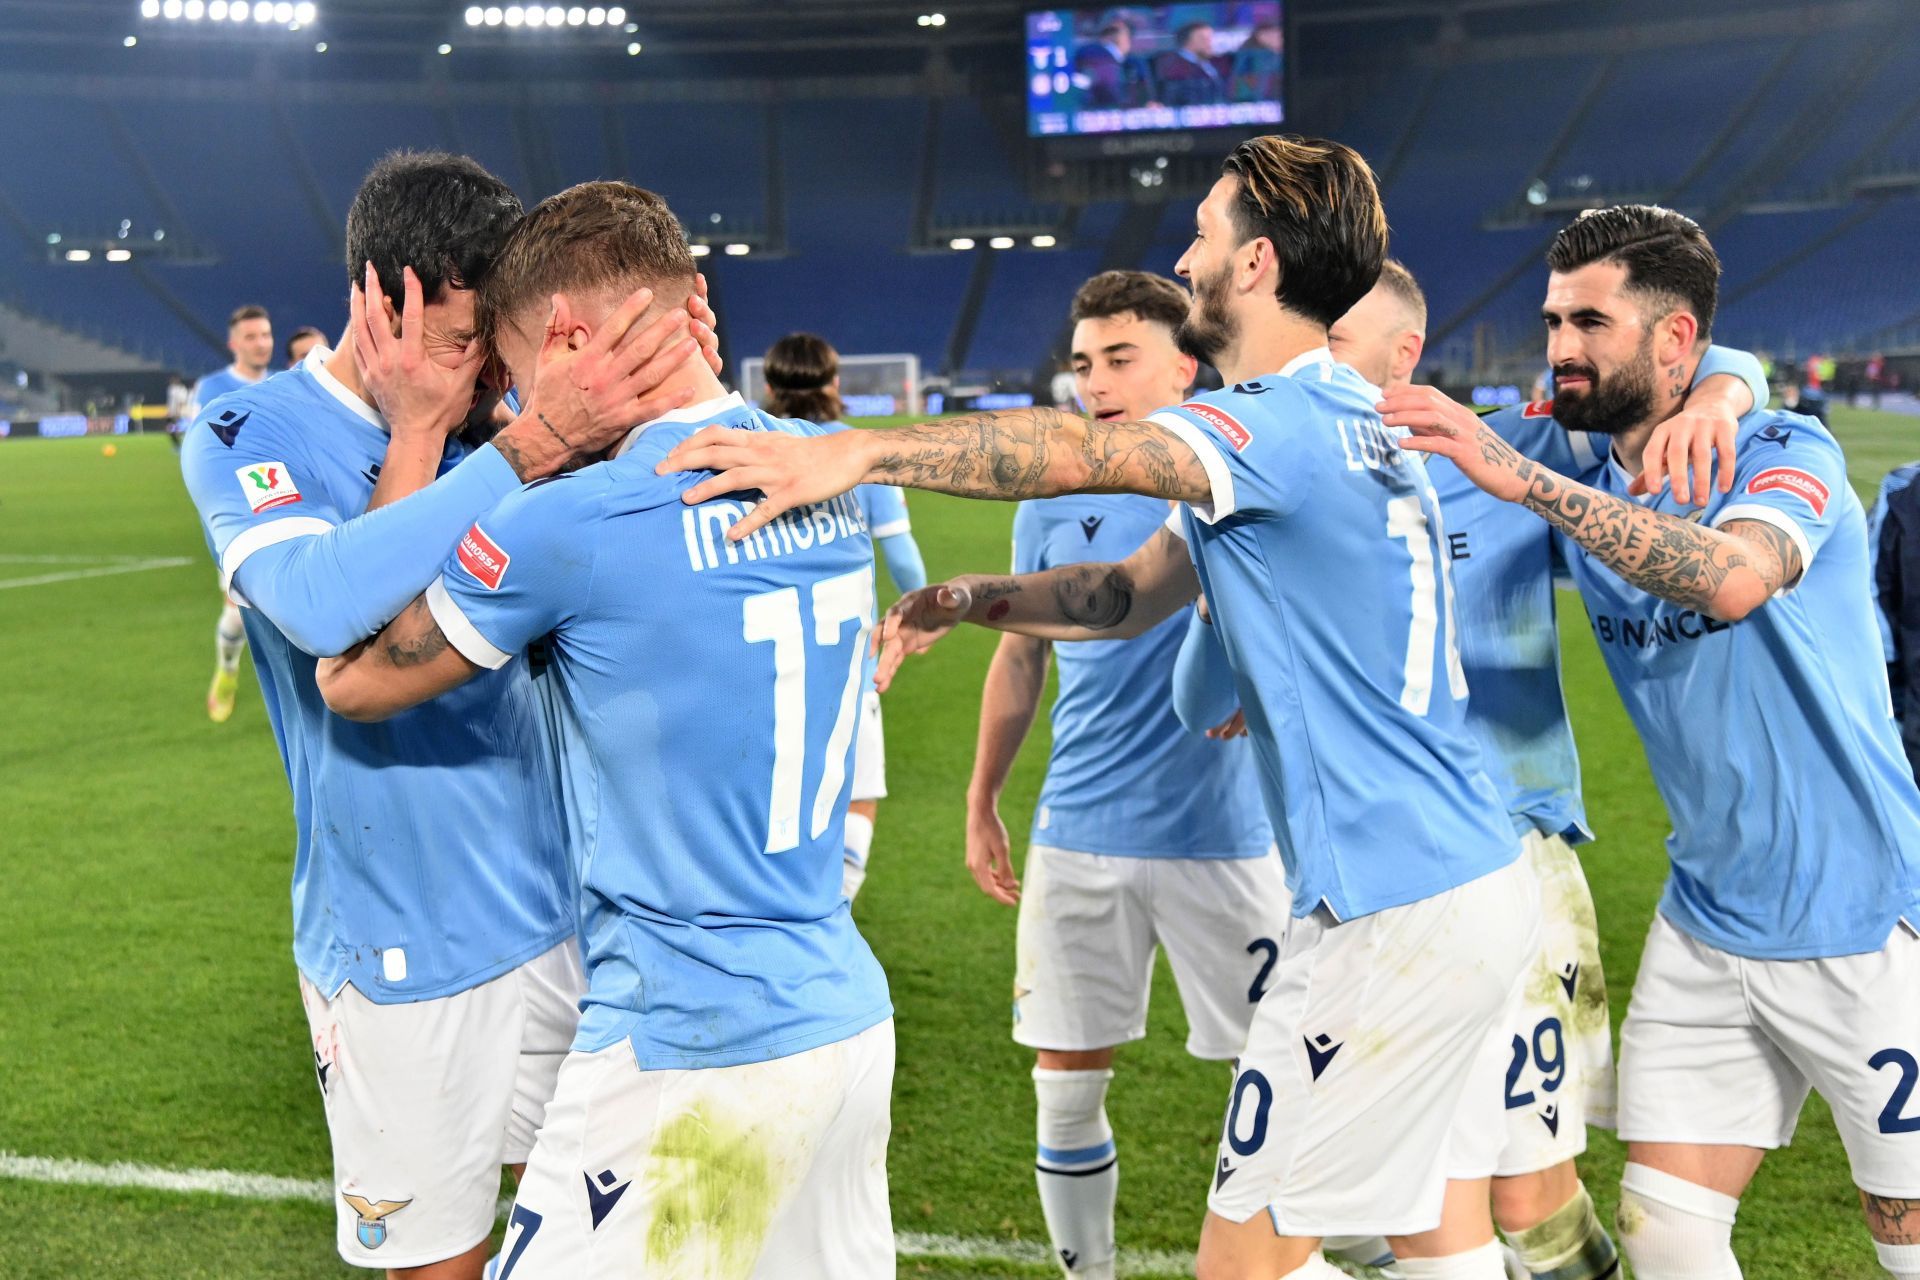 Lazio take on Udinese this weekend